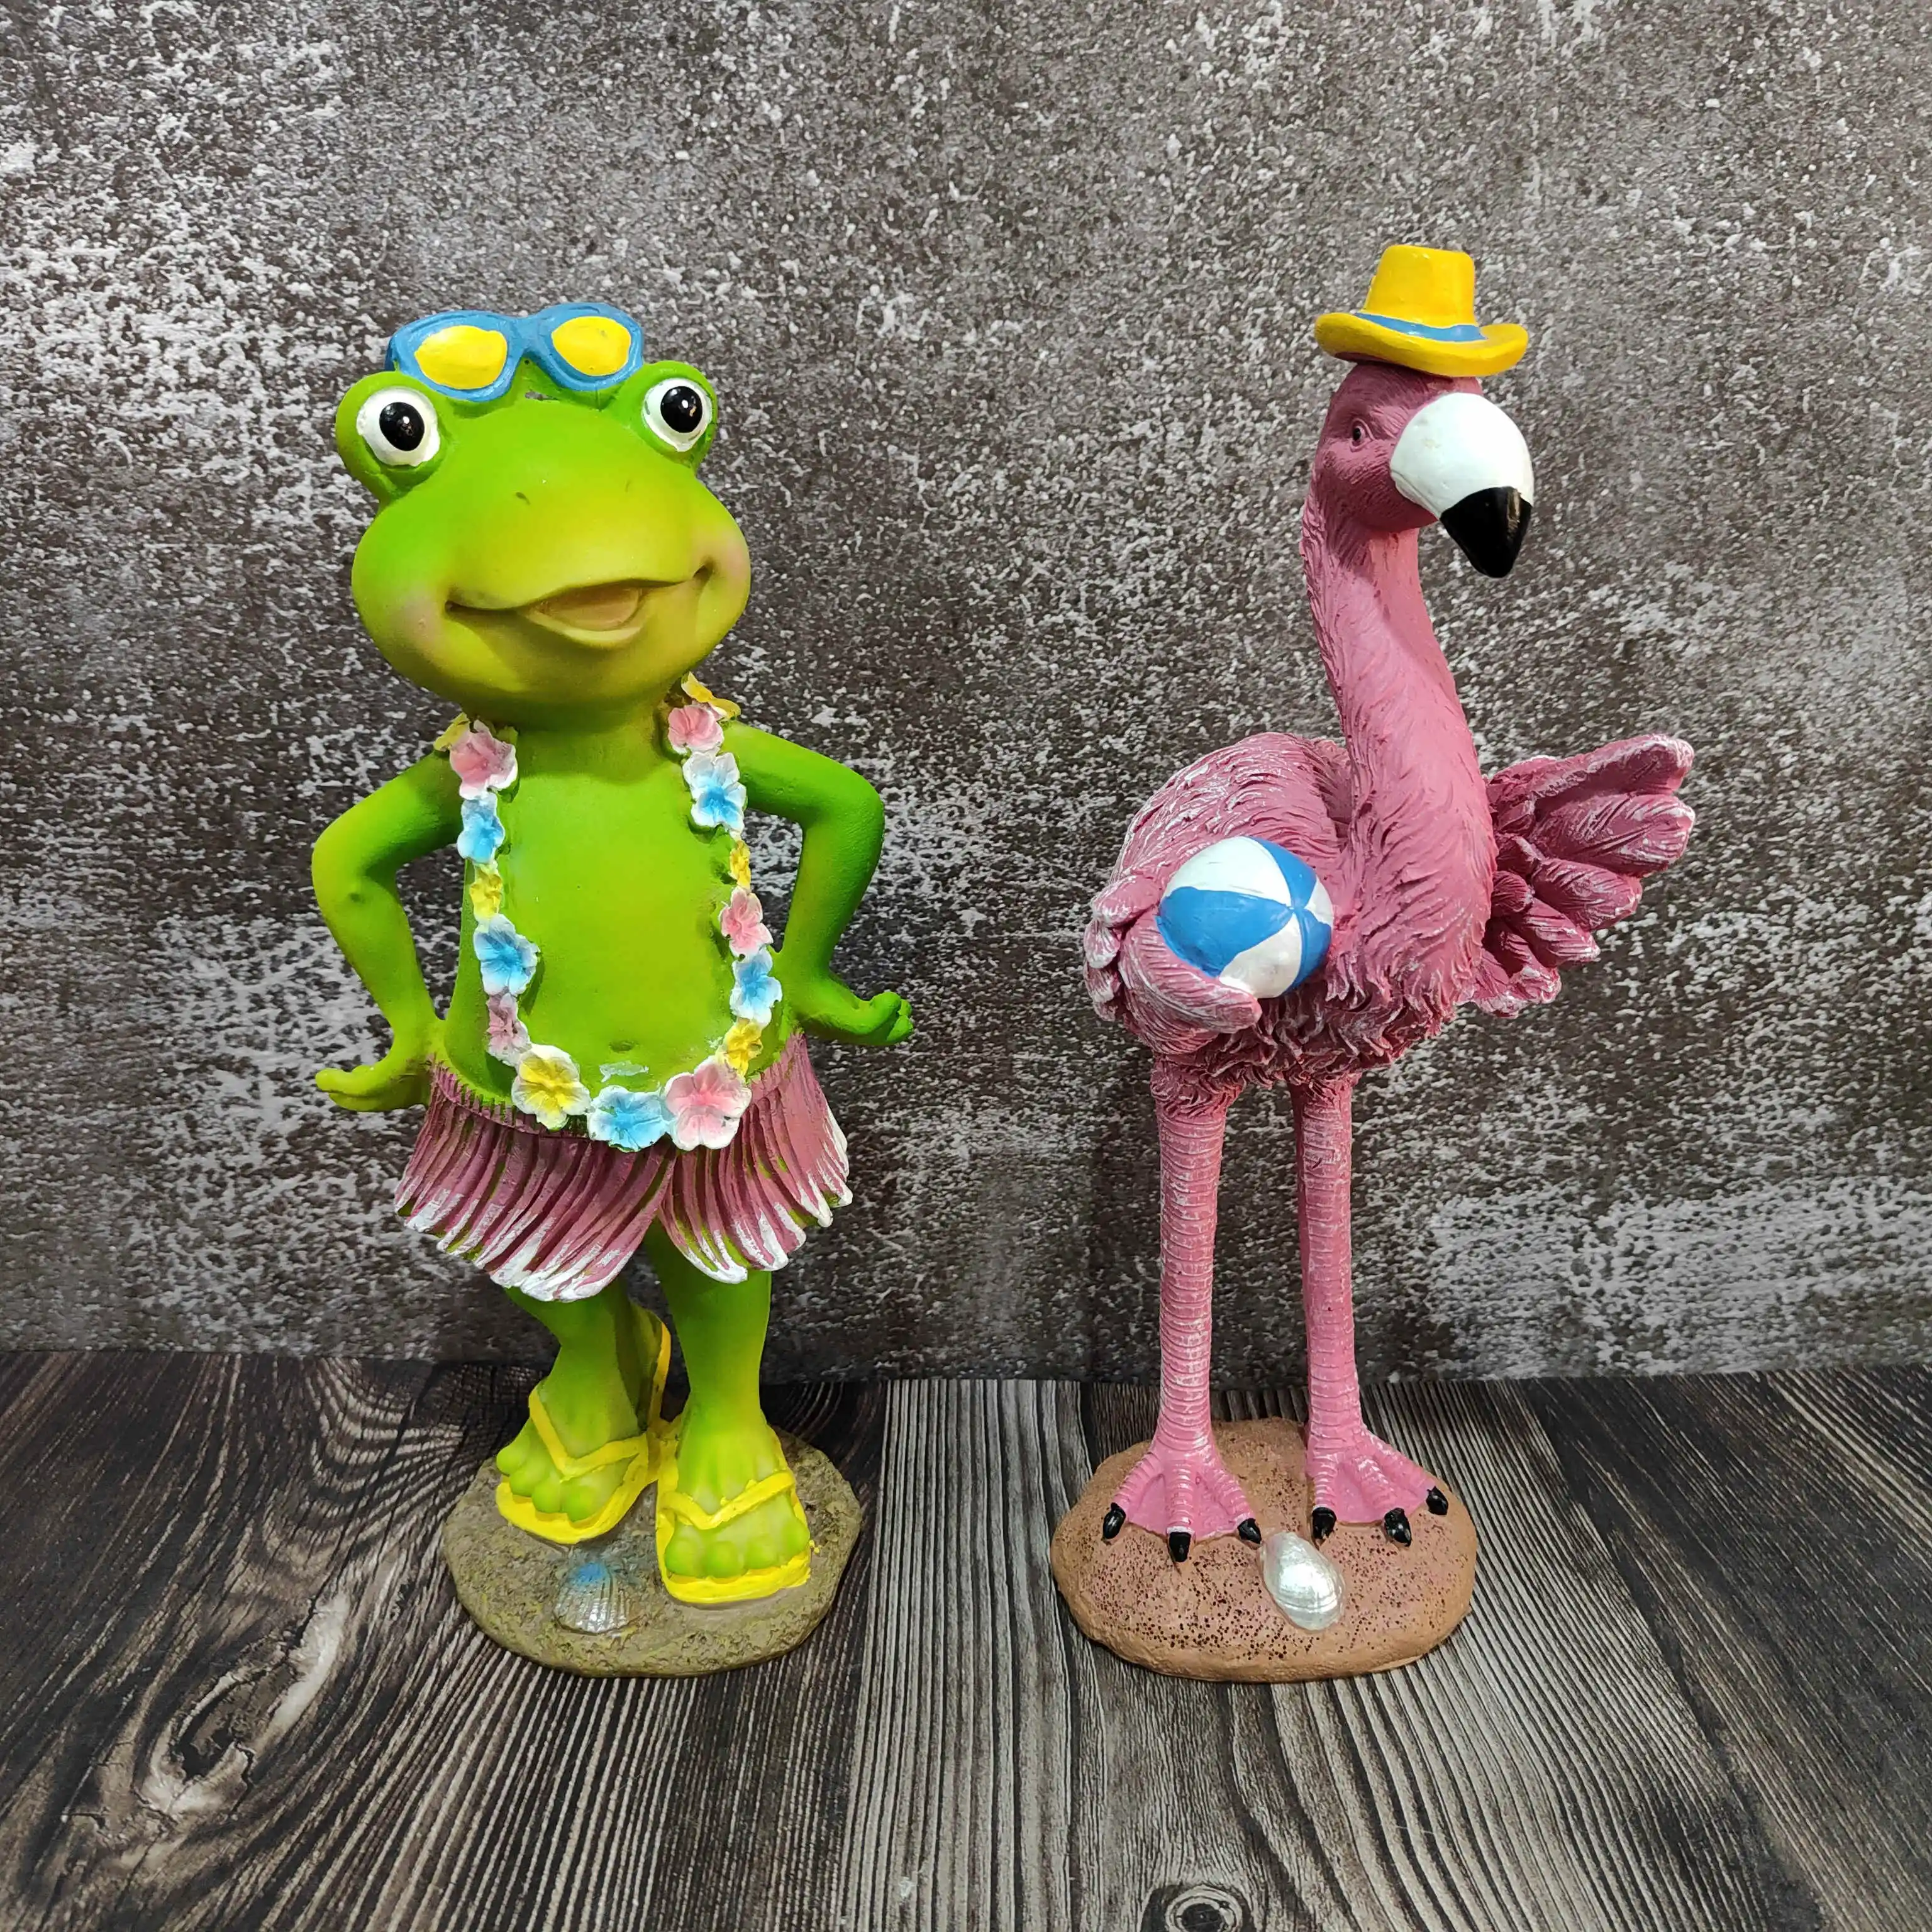 Popular Polyresin Figurines Home Decor Frog Flamingo Gifts Toucan Statue Modern Ornaments Animal Resin Sculpture